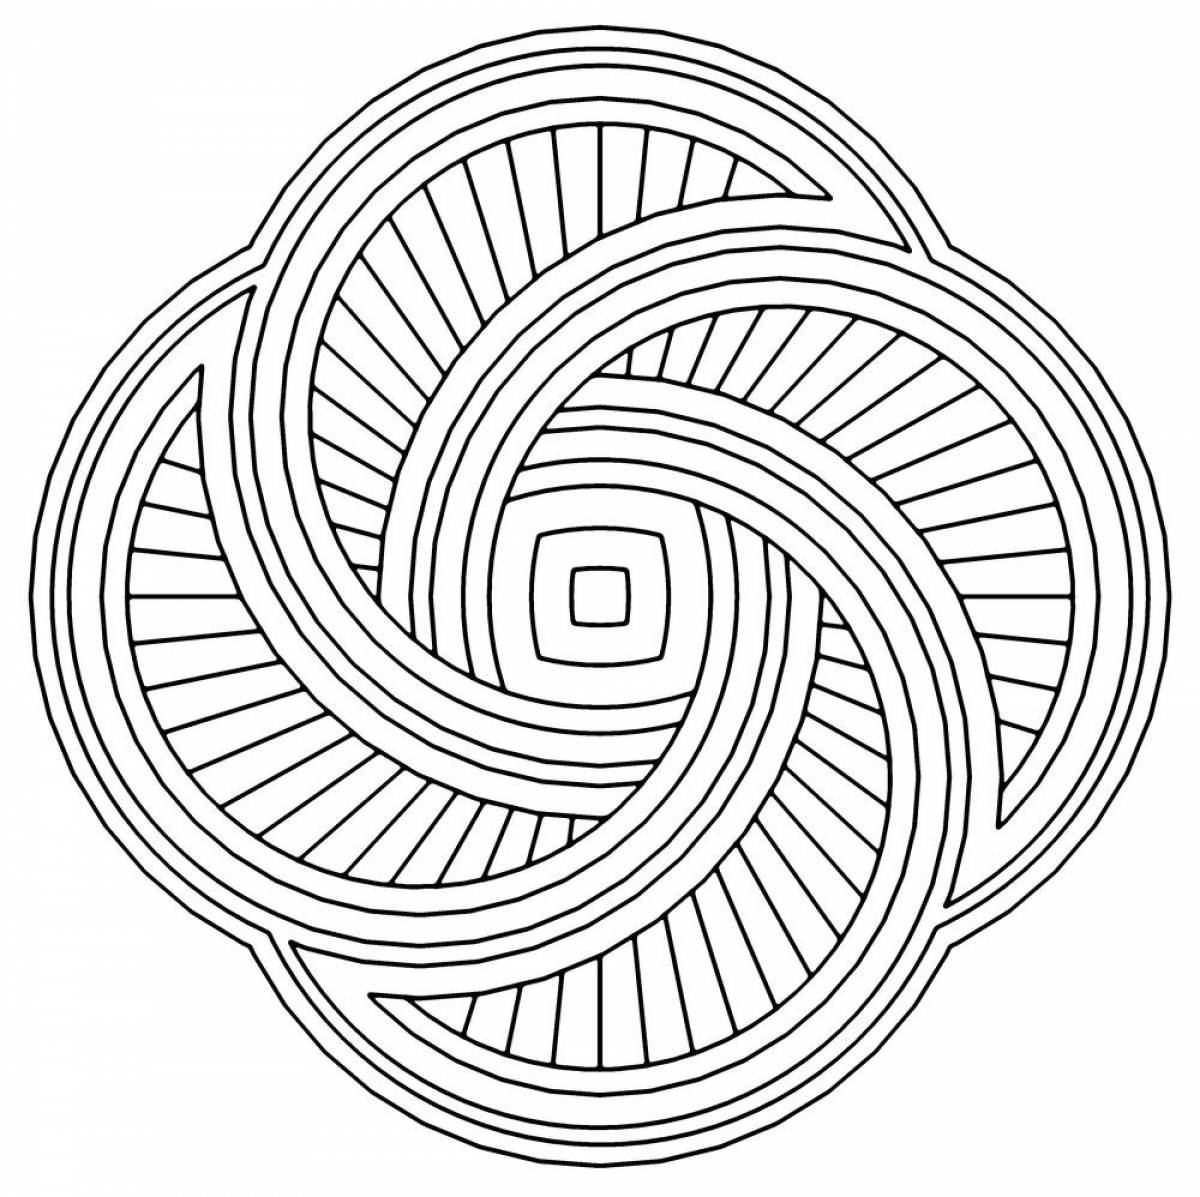 Luminous spiral coloring page